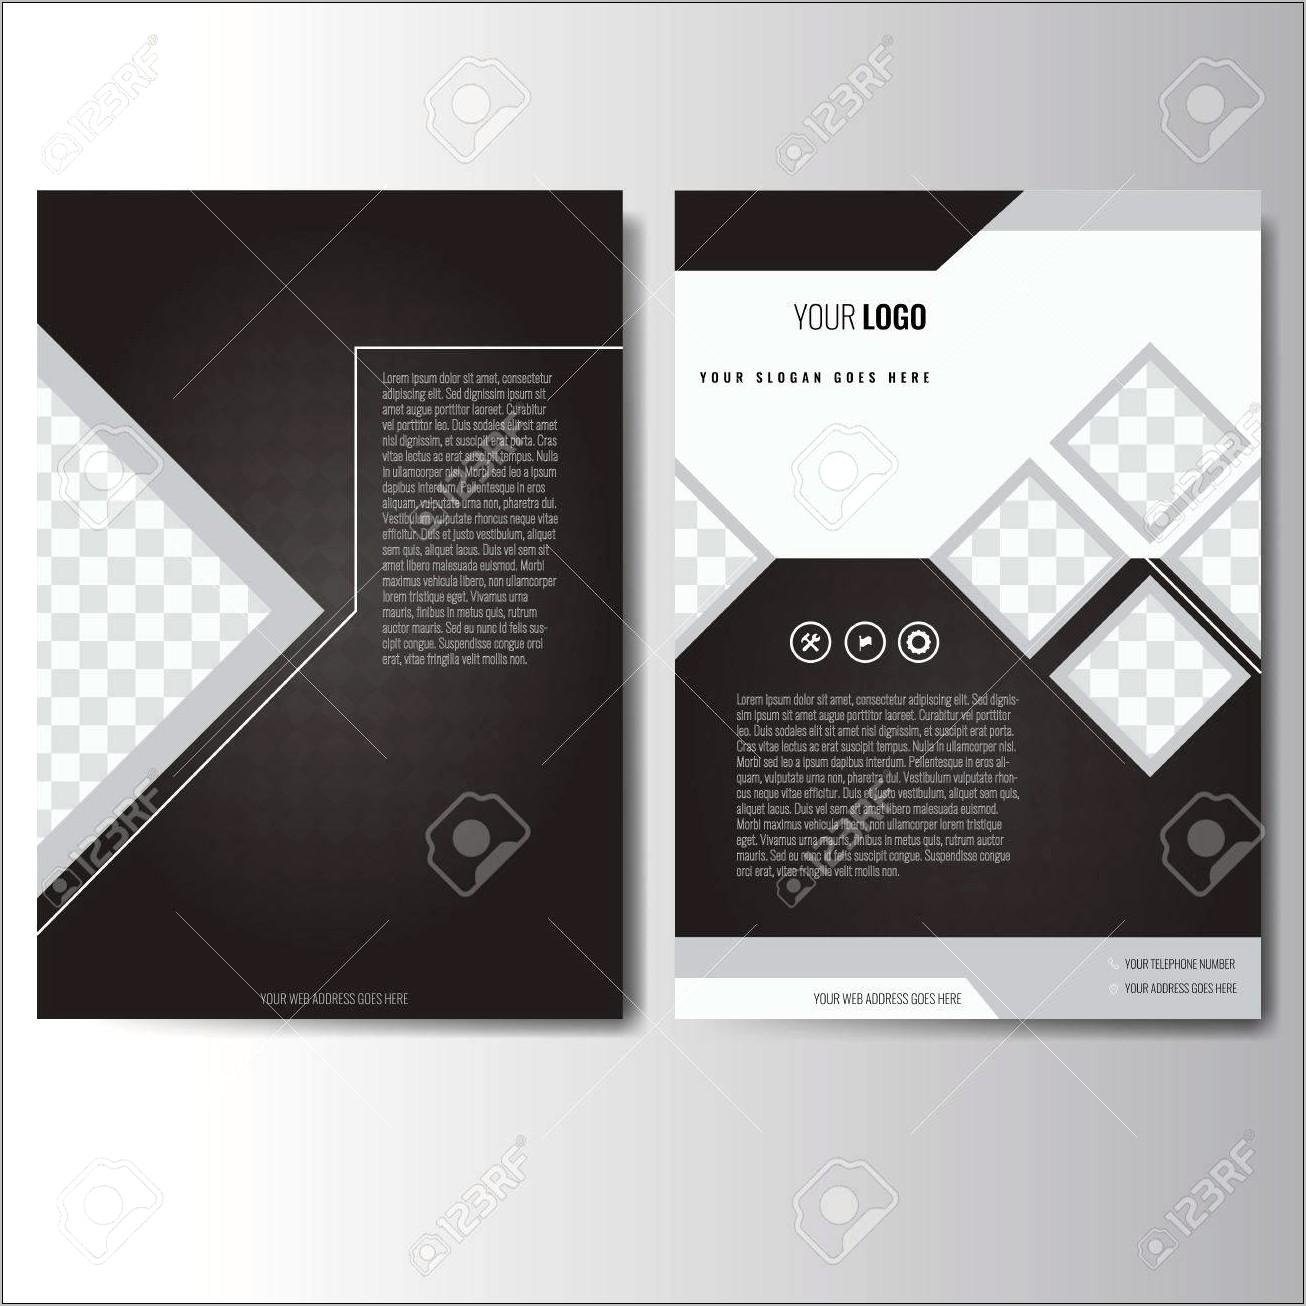 Free Black And White Flyer Templates